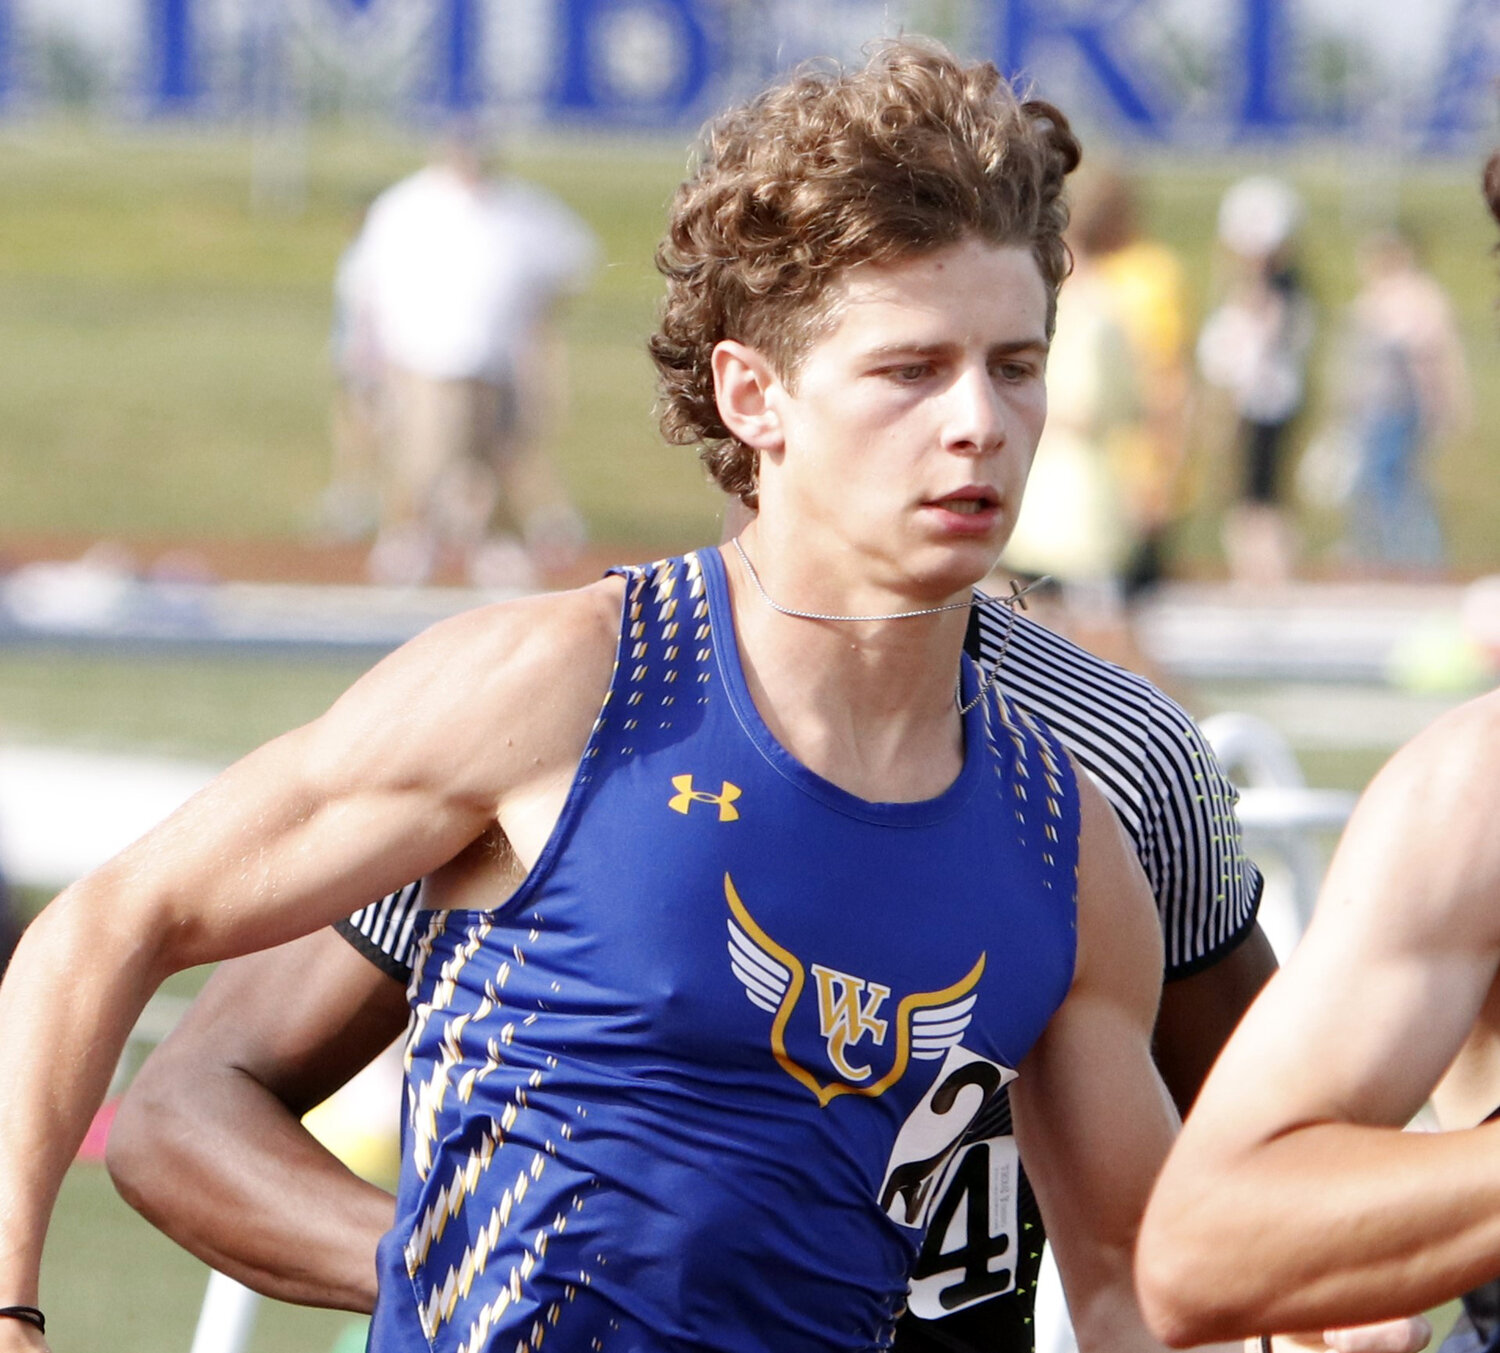 David Riggs runs in the 800-meter race during the Class 3, District 3 meet. Riggs placed second in the competition to advance to the sectional meet.